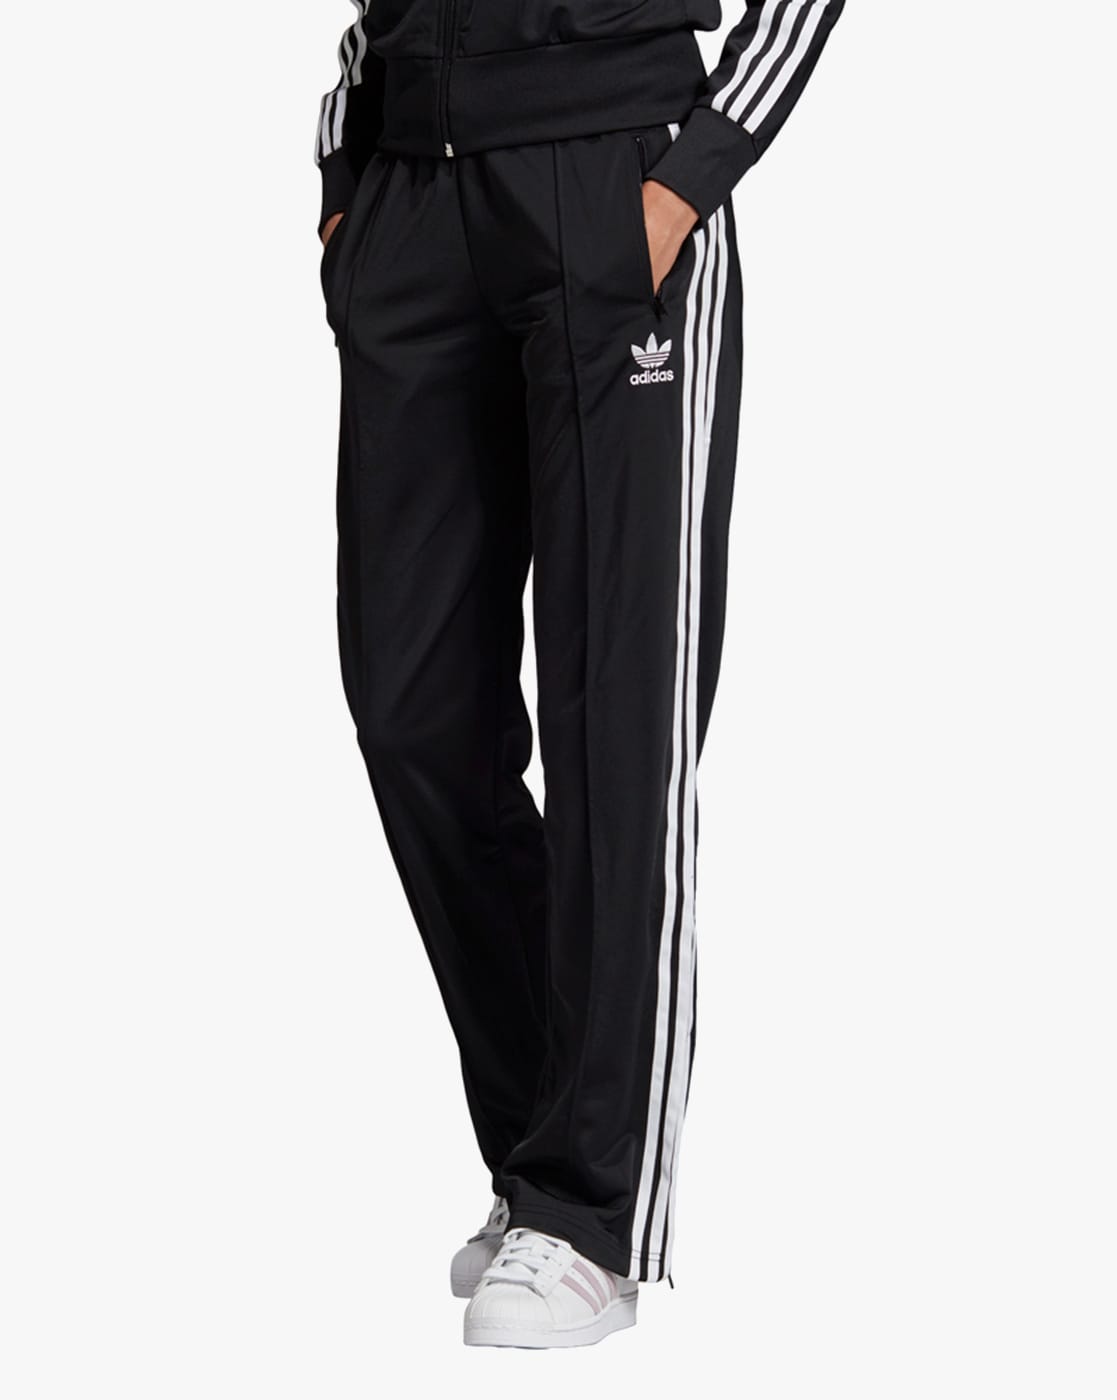 adidas Allover adidas Graphic HighRise Flare Pants  Blue  adidas India